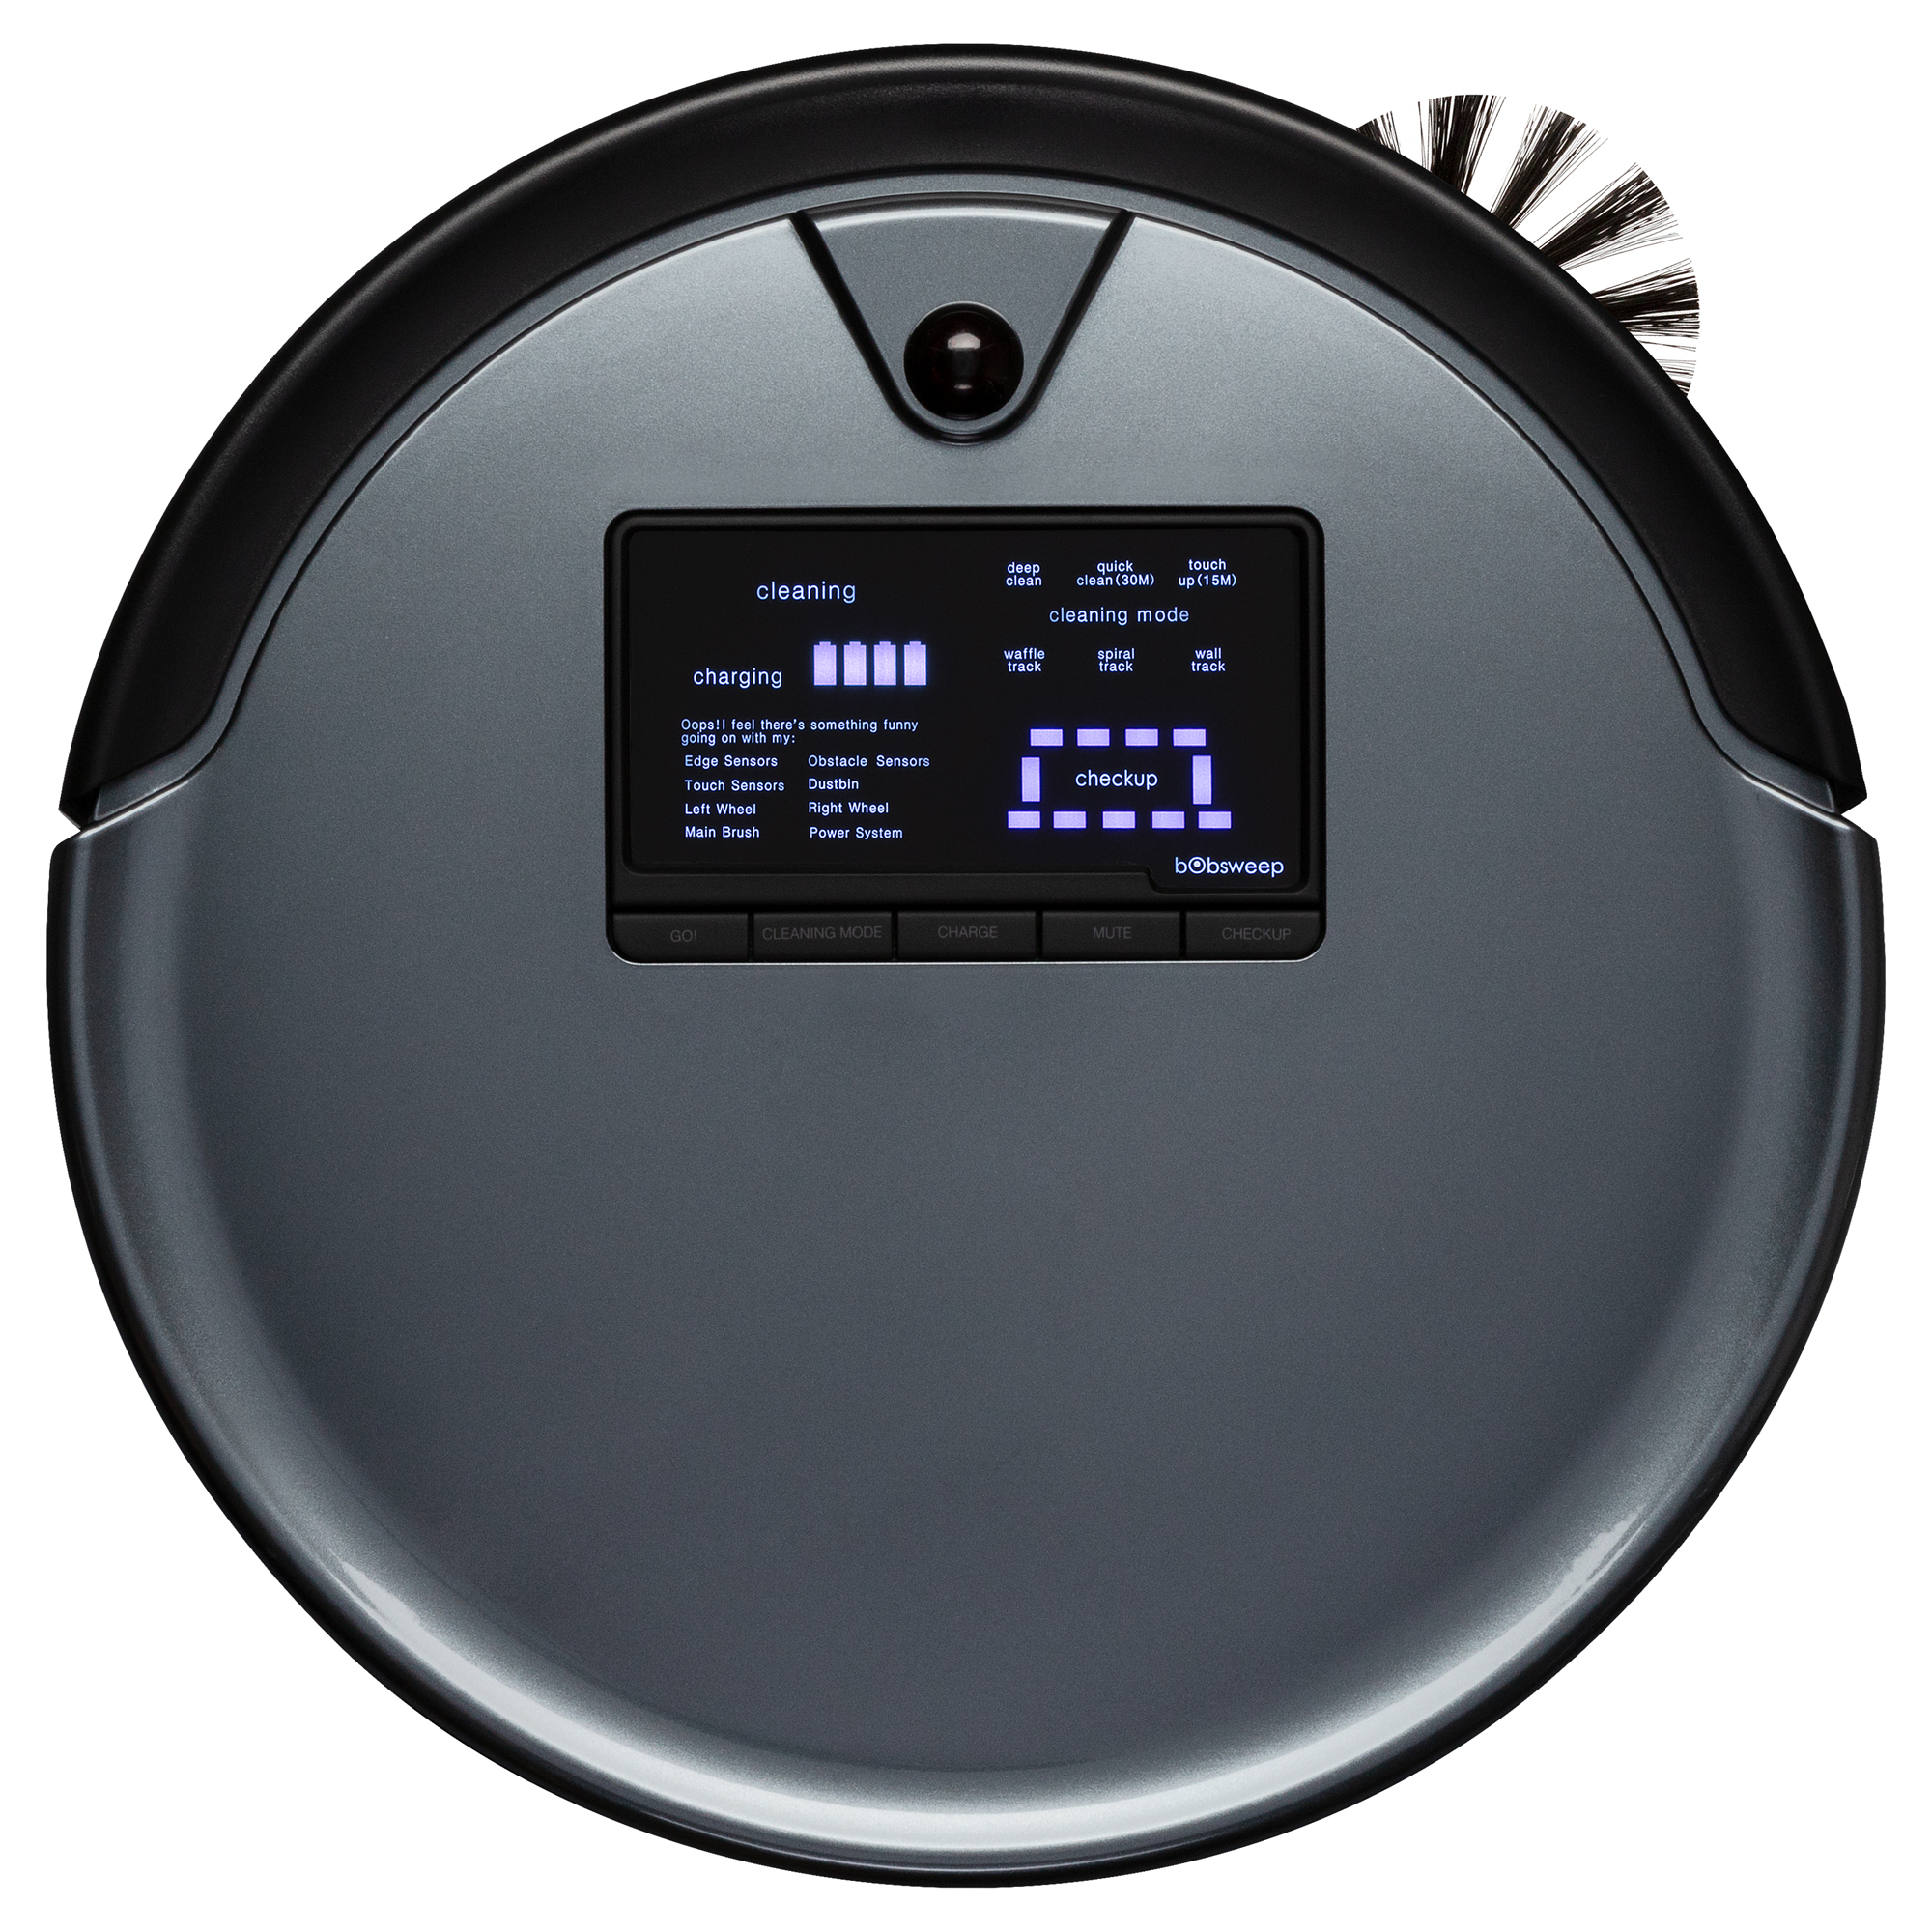 Bobsweep Pet Hair Plus Robotic Vacuum Cleaner and Mop, Charcoal - image 1 of 8